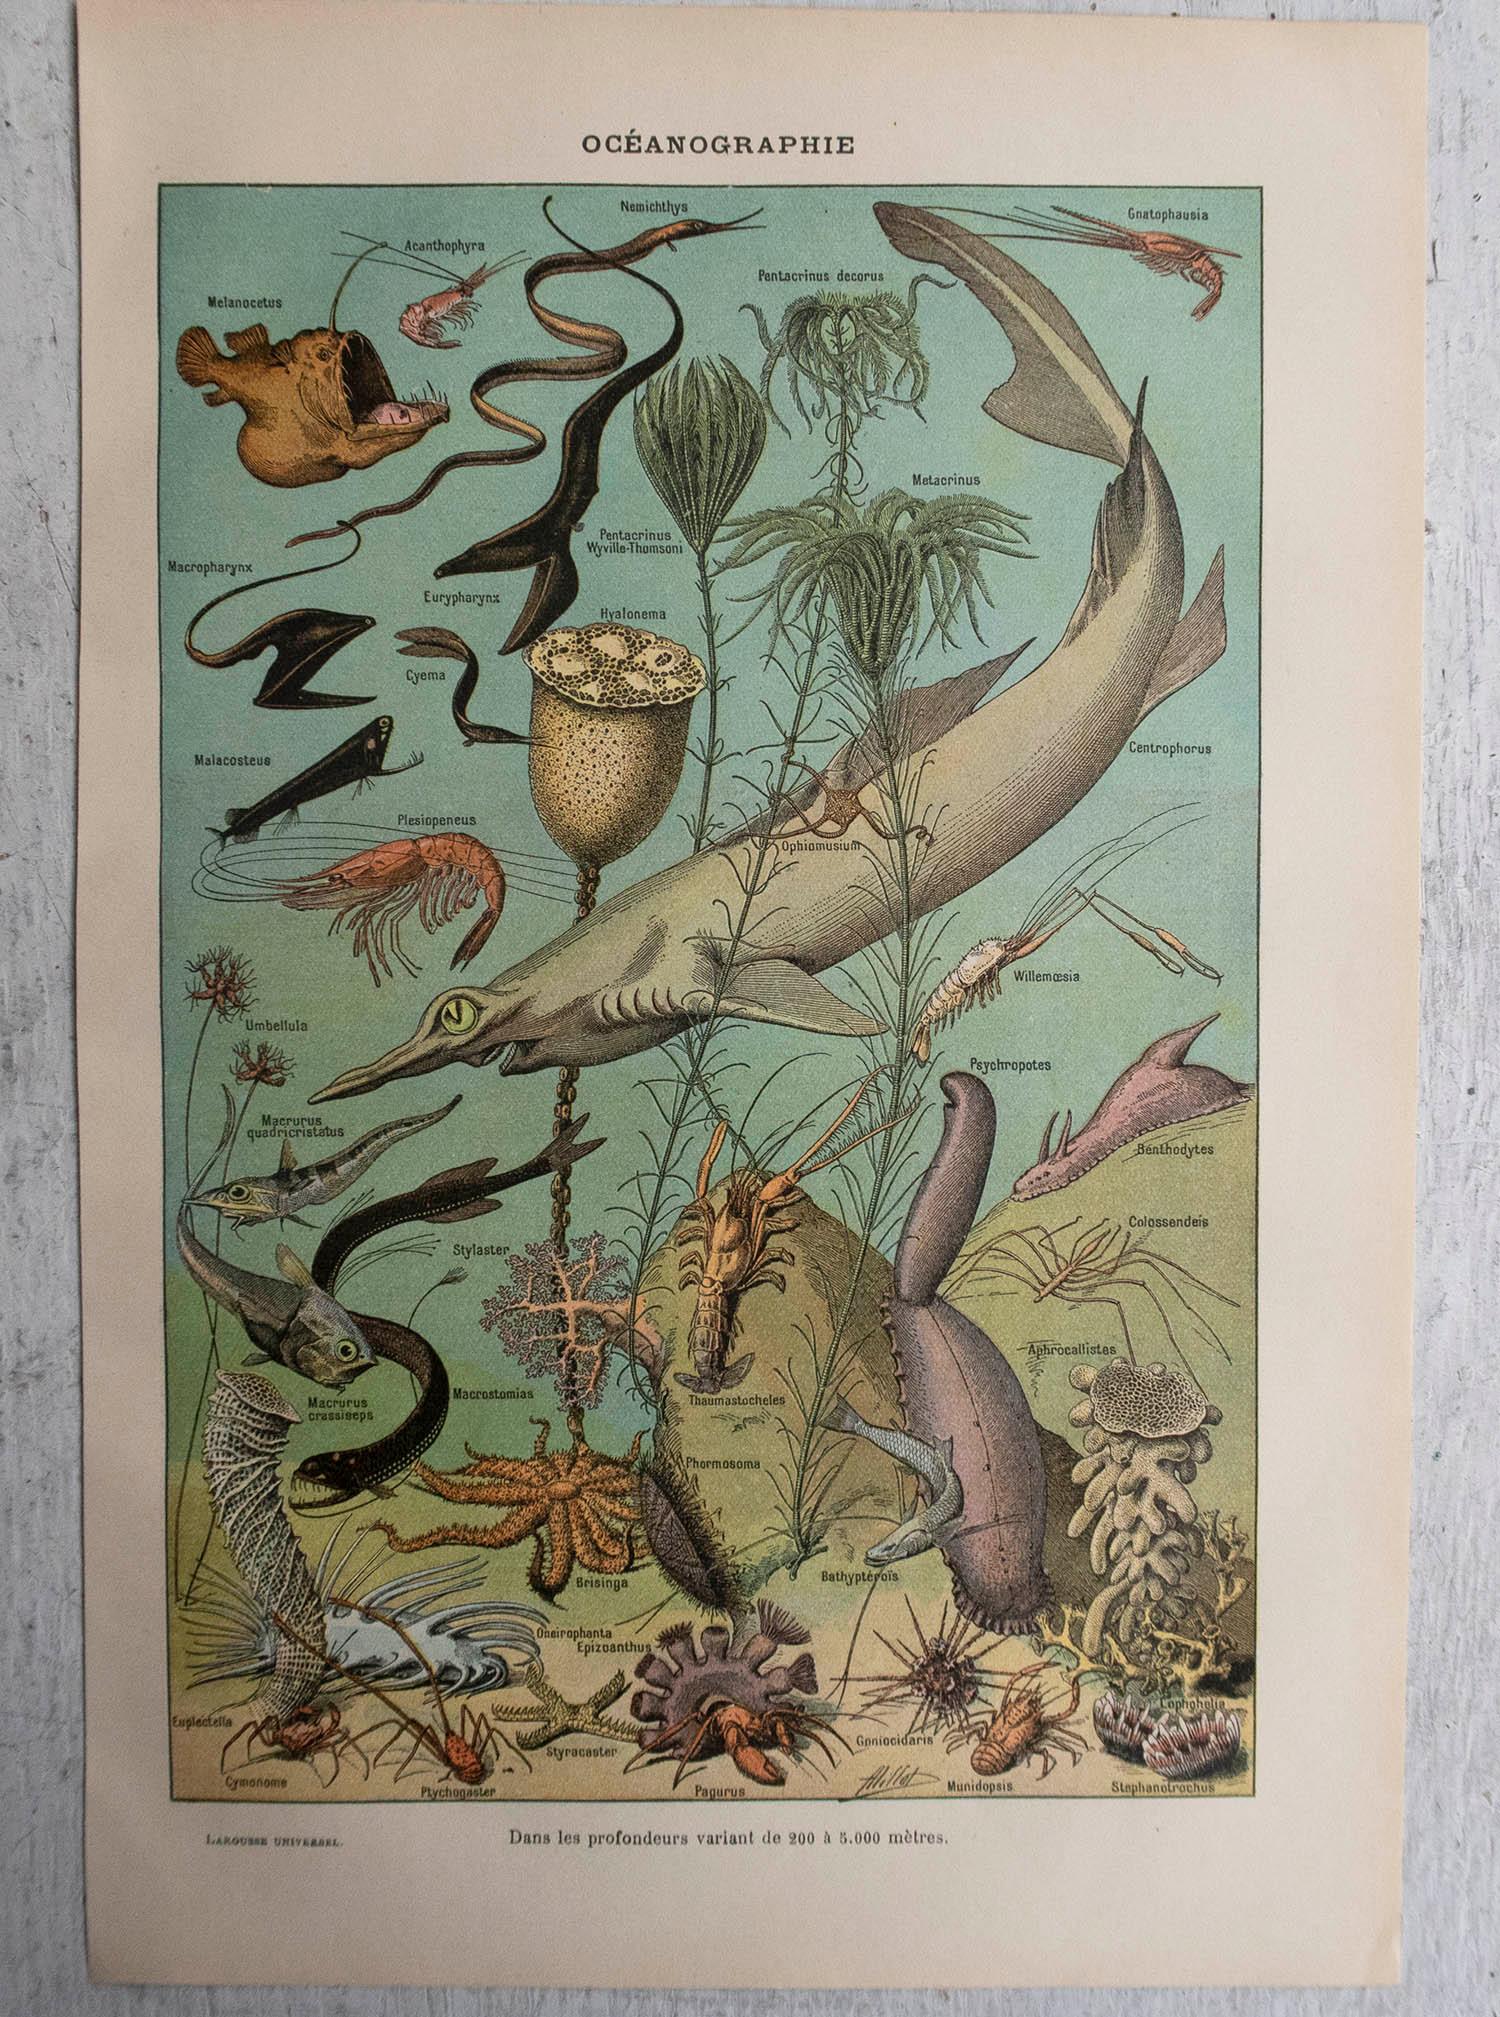 Other Original Vintage Print of Oceanography. French, C.1920